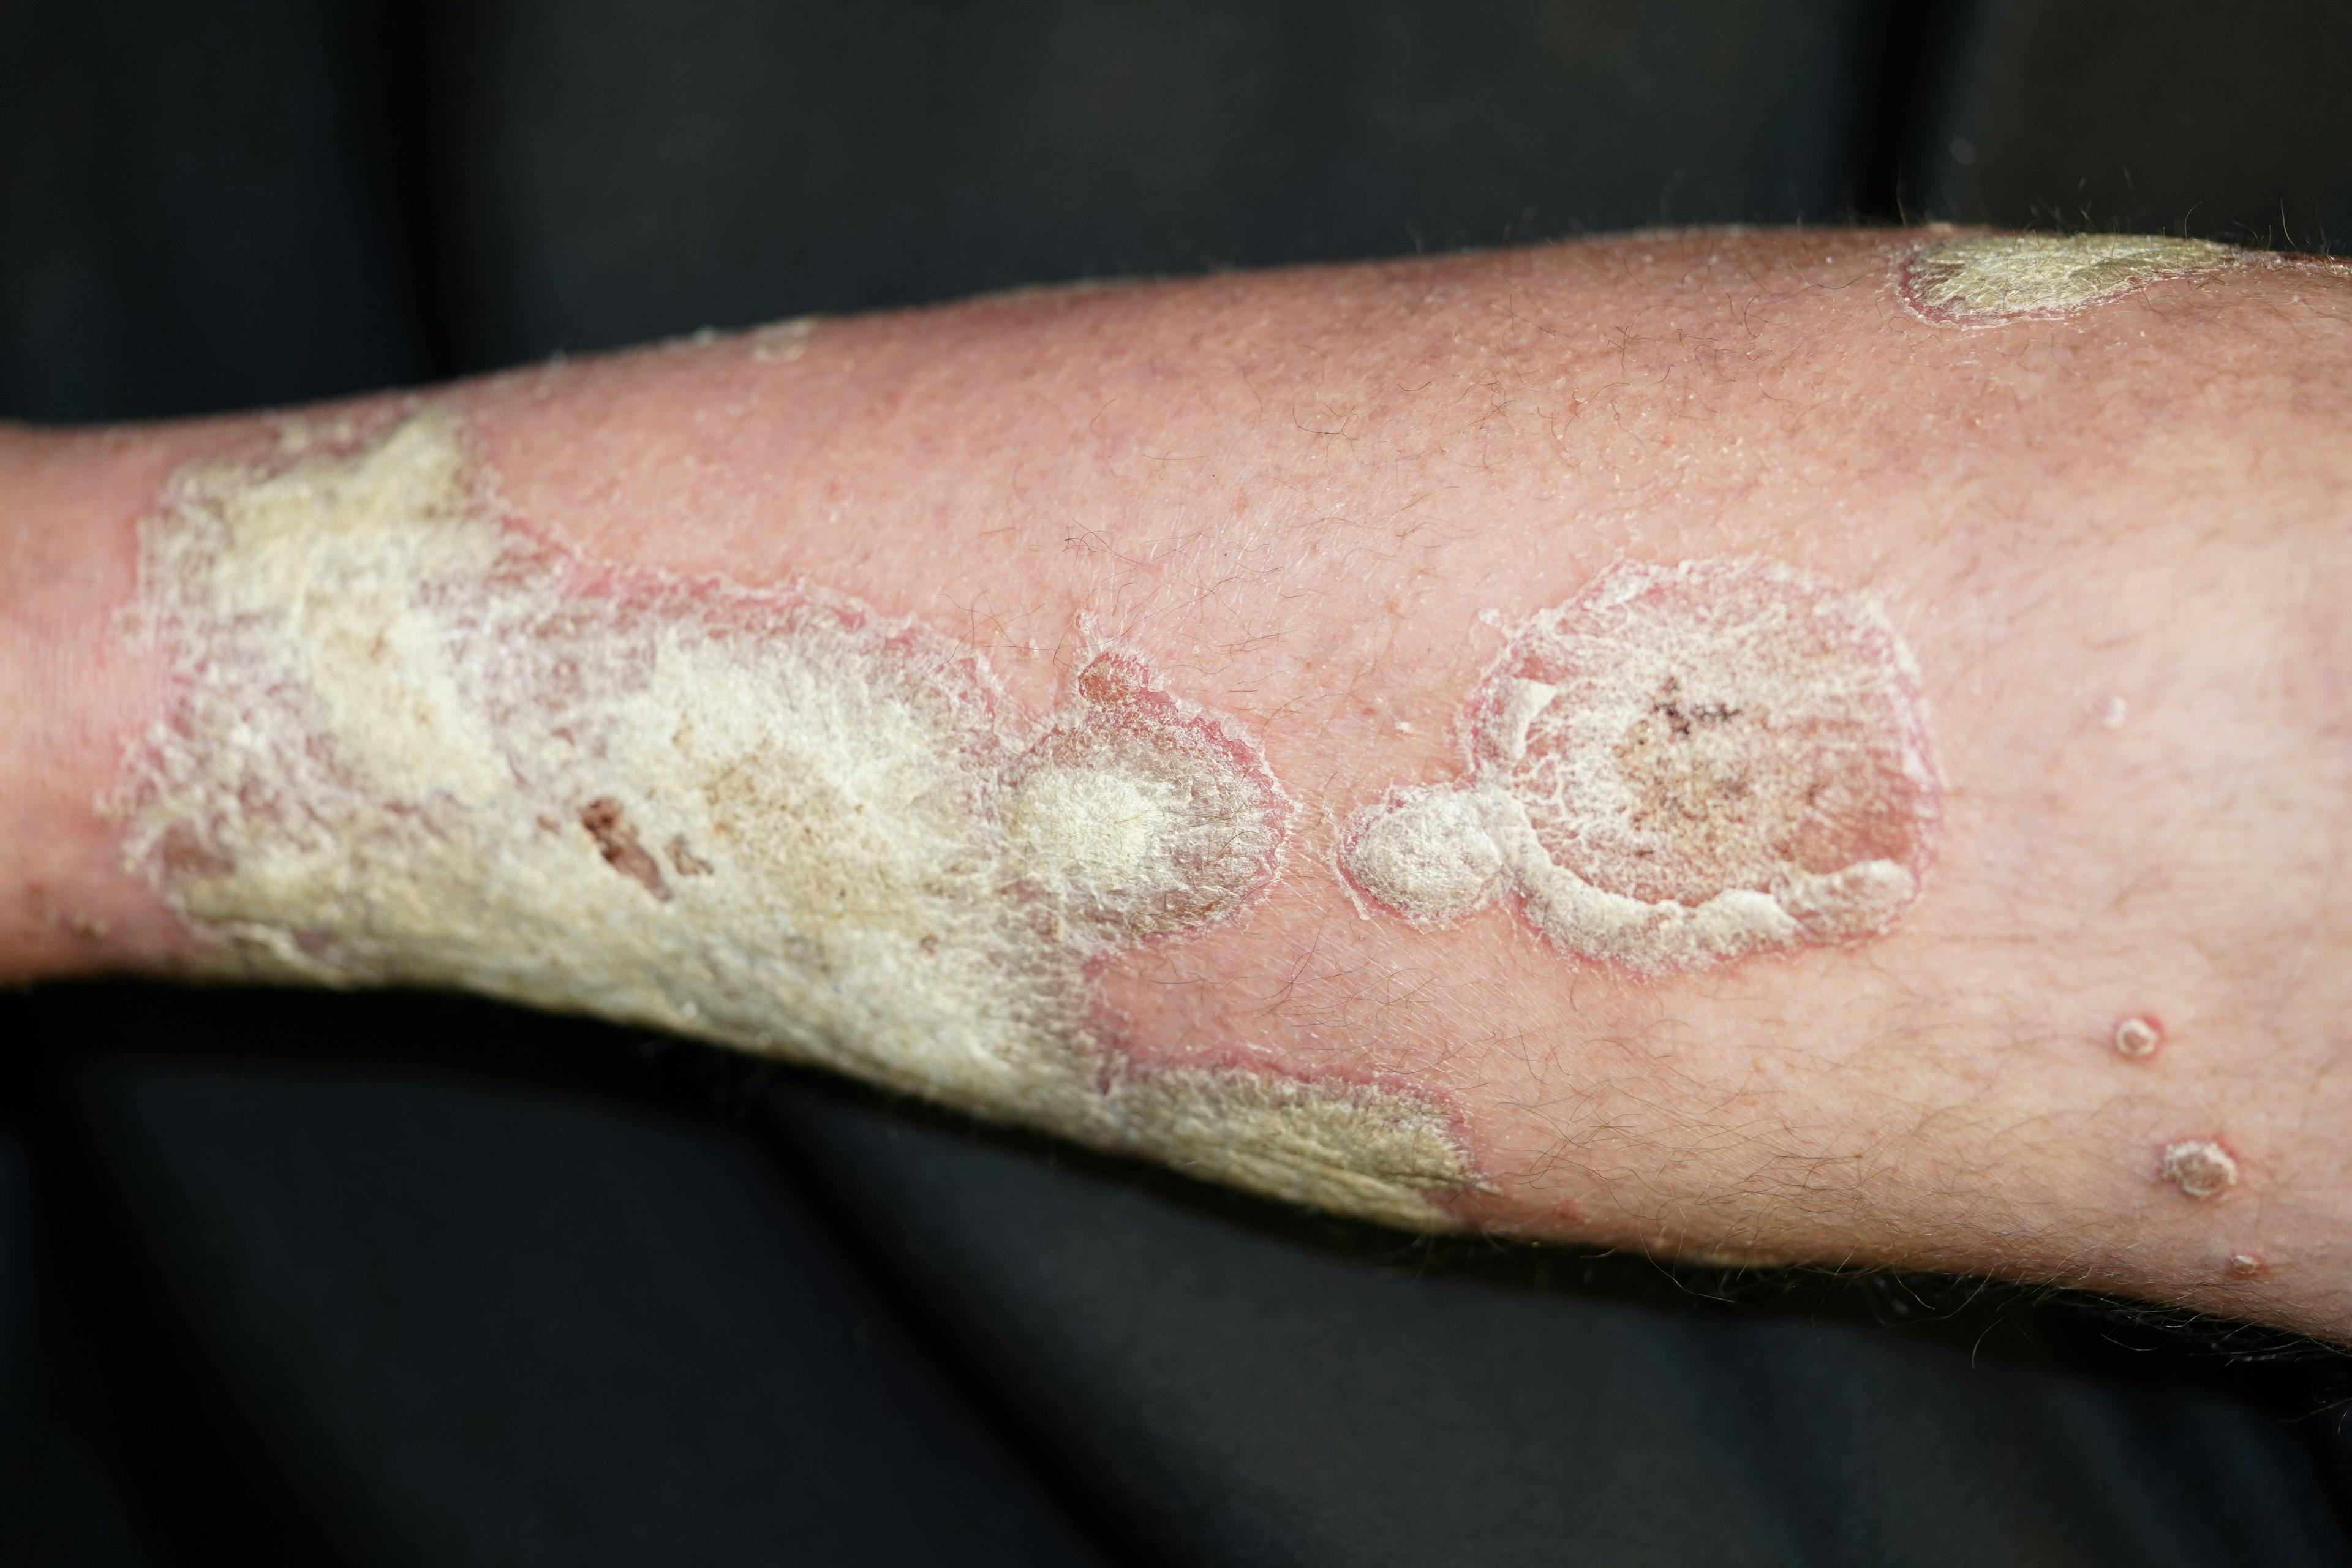 Based on efficacy and safety, as well as infrequent dosing, guselkumab may be a first-line, preferred treatment for patients with moderate-to-severe psoriasis.